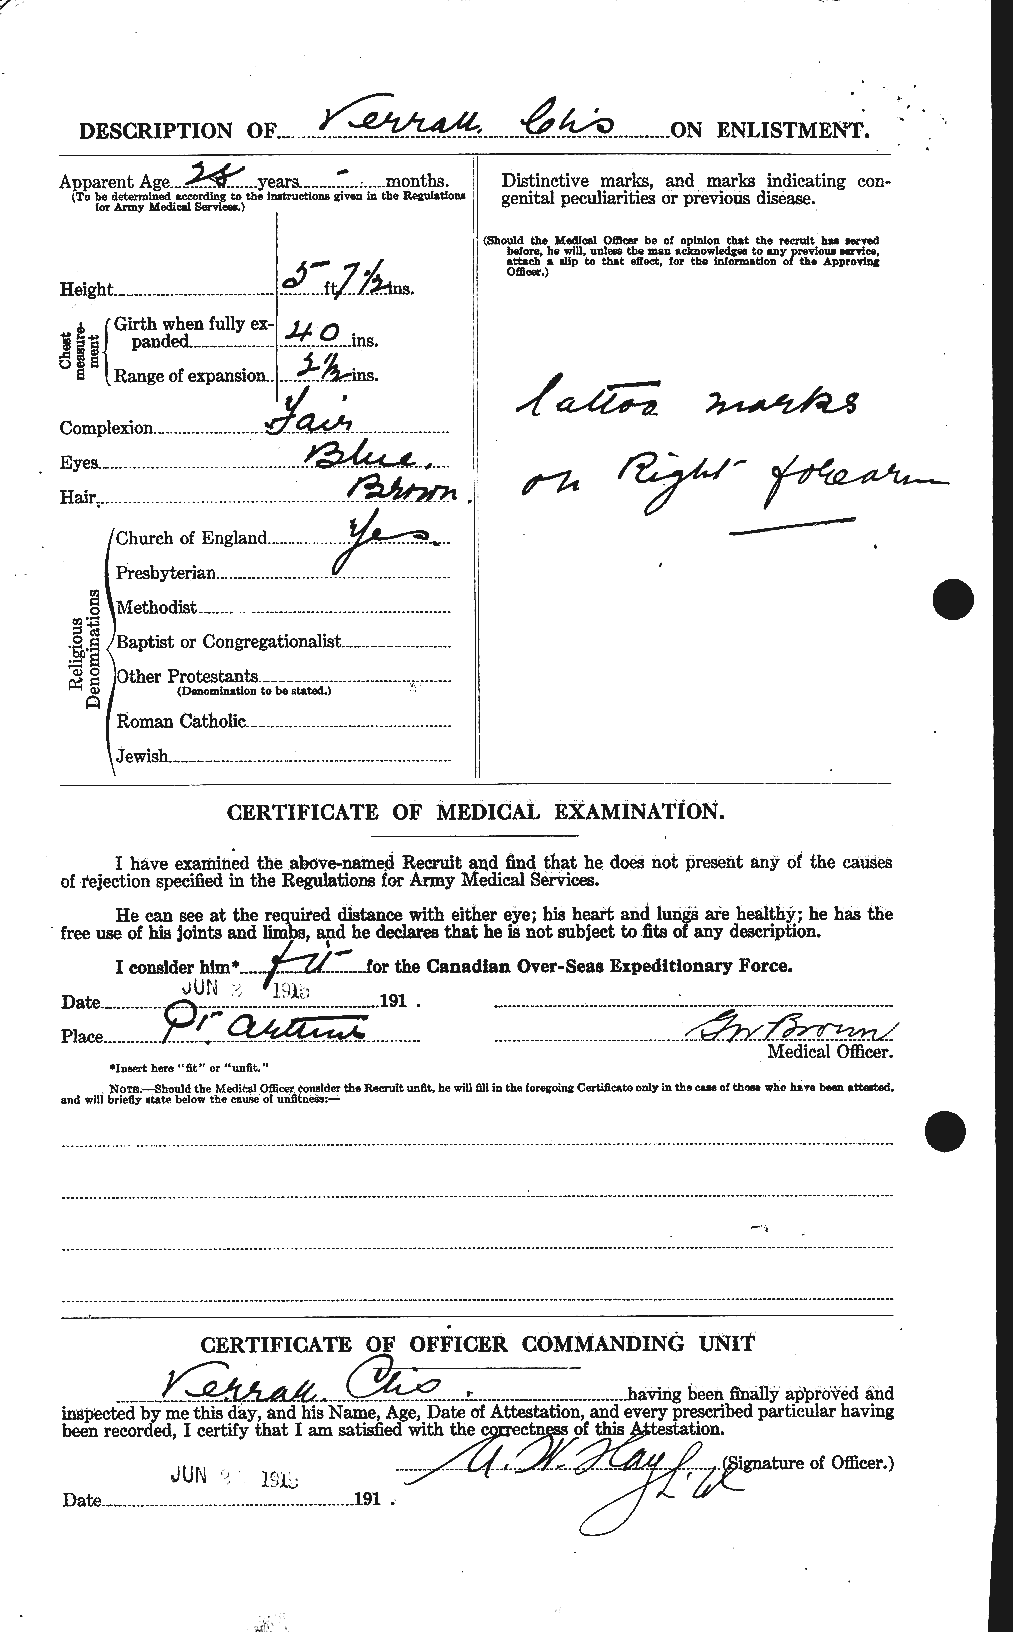 Personnel Records of the First World War - CEF 651688b